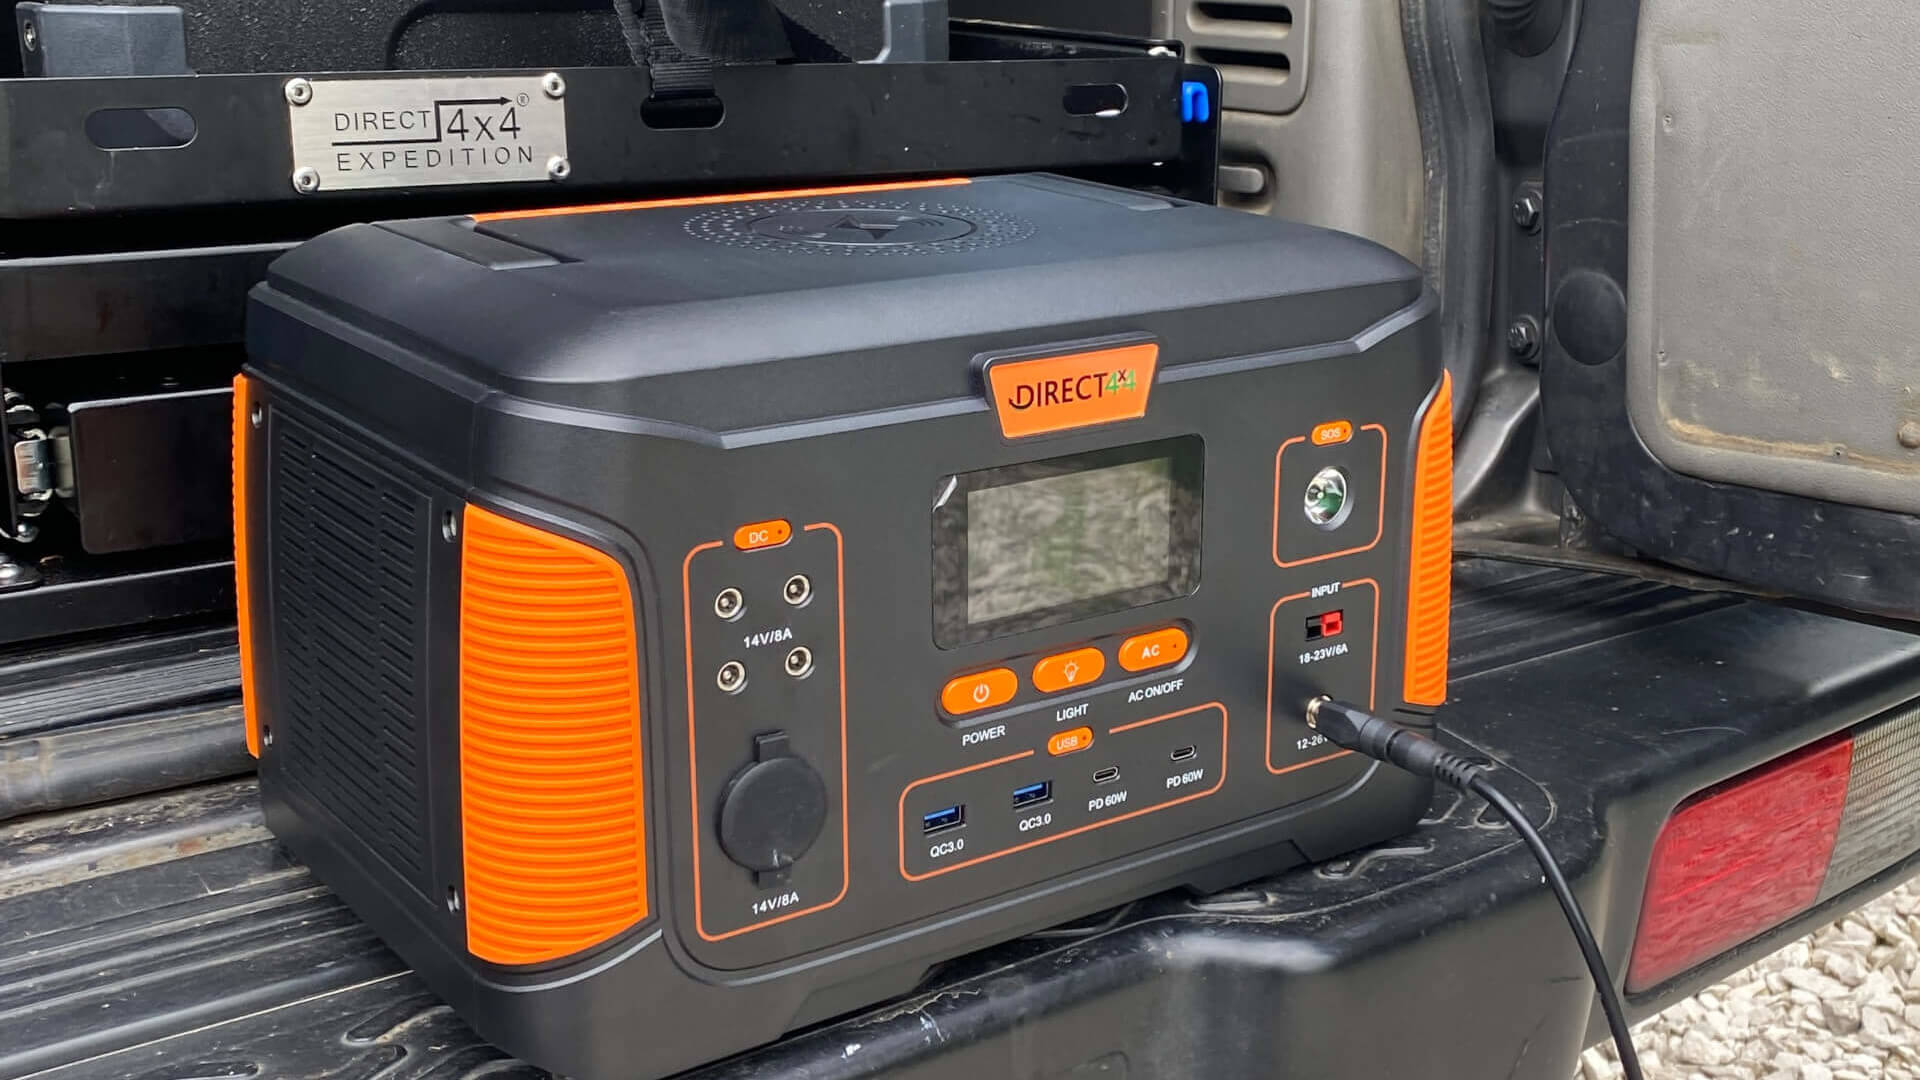 Photo of a Direct4x4 portable power station on the back of a pickup truck